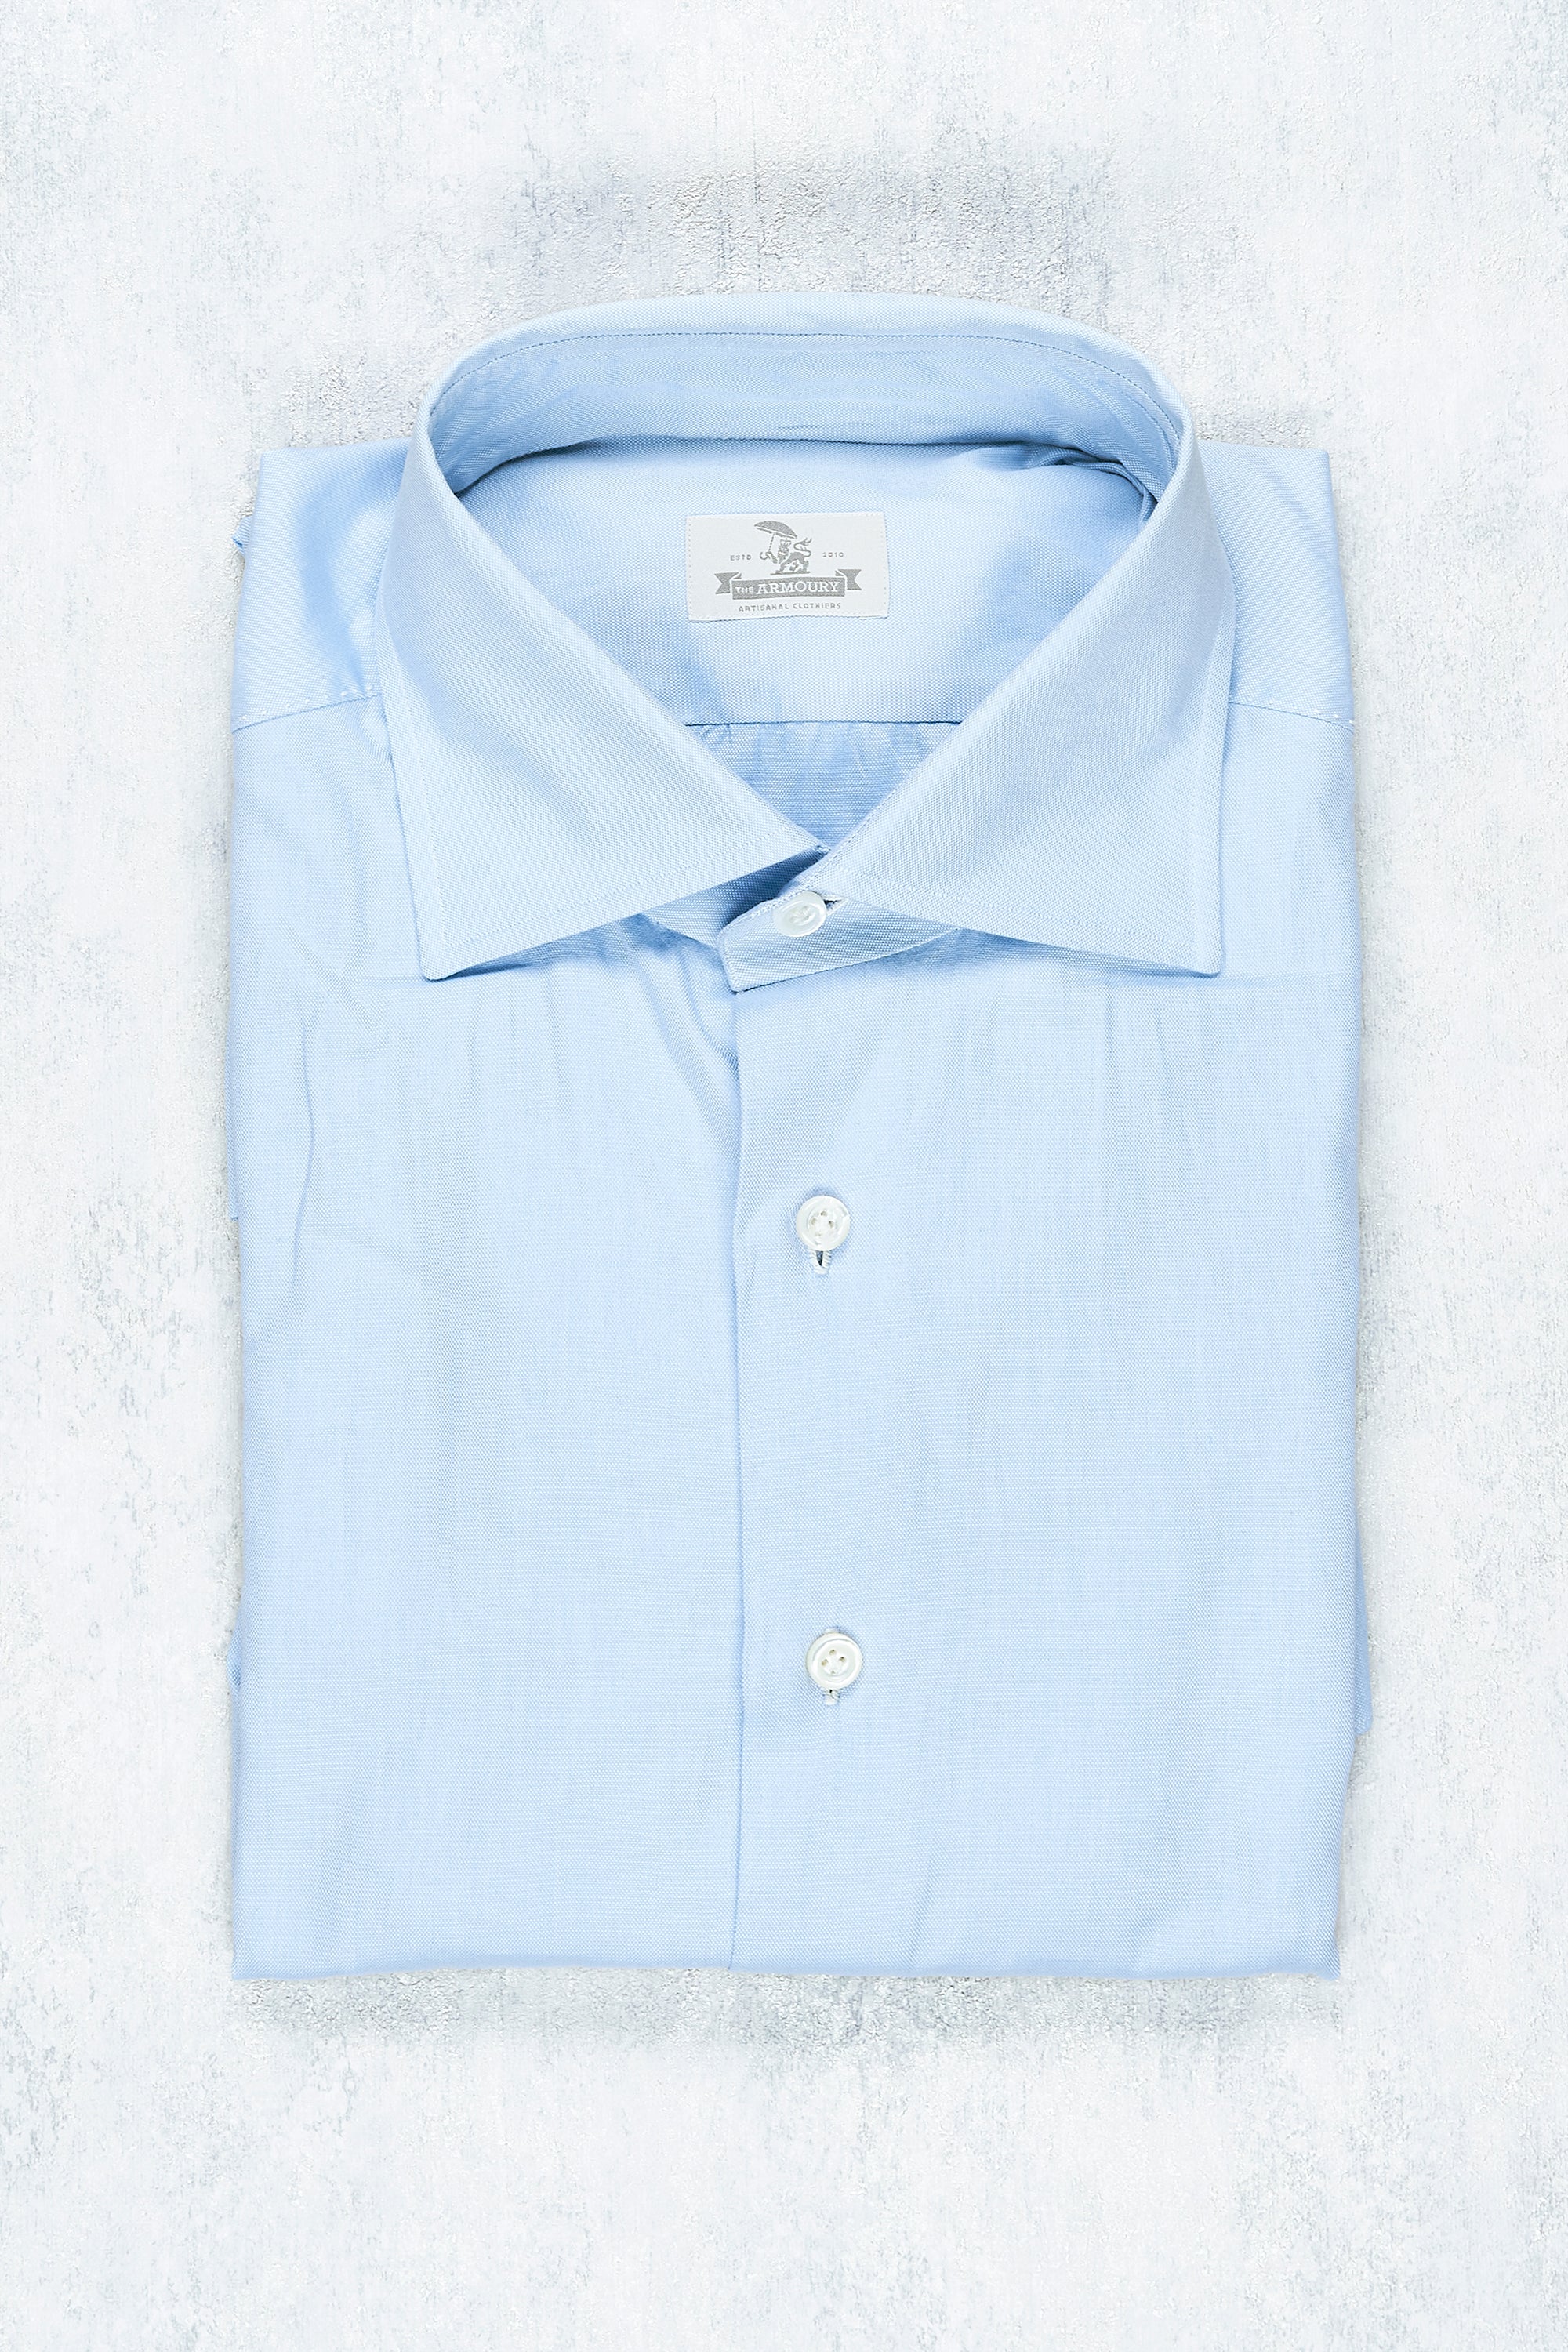 The Armoury Blue Cotton Oxford Shirt